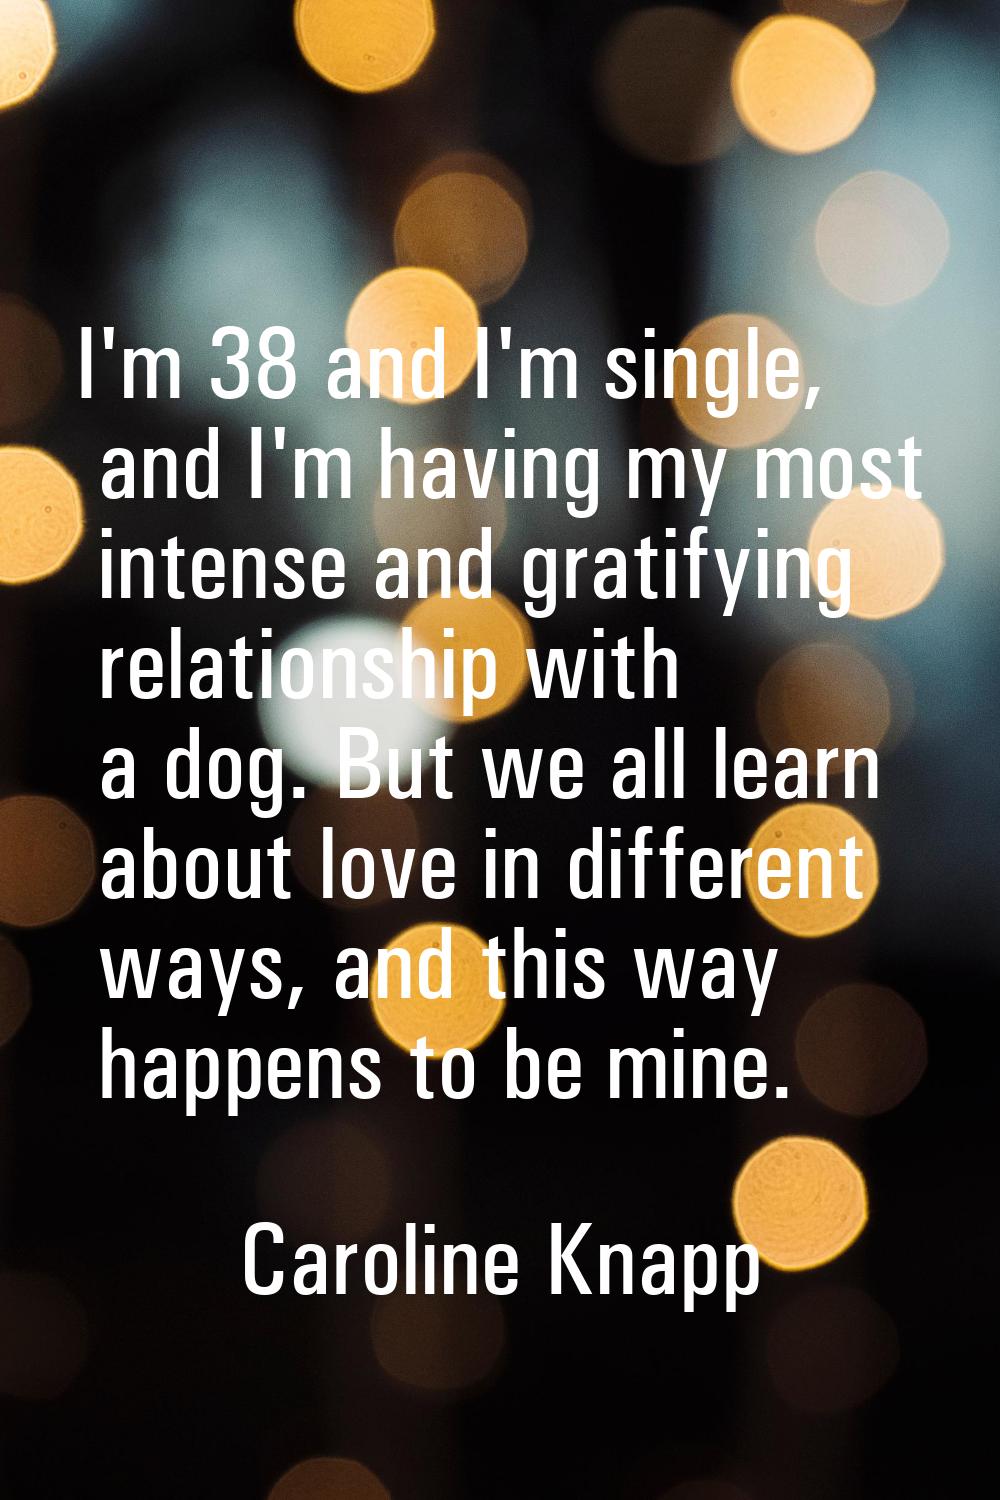 I'm 38 and I'm single, and I'm having my most intense and gratifying relationship with a dog. But w